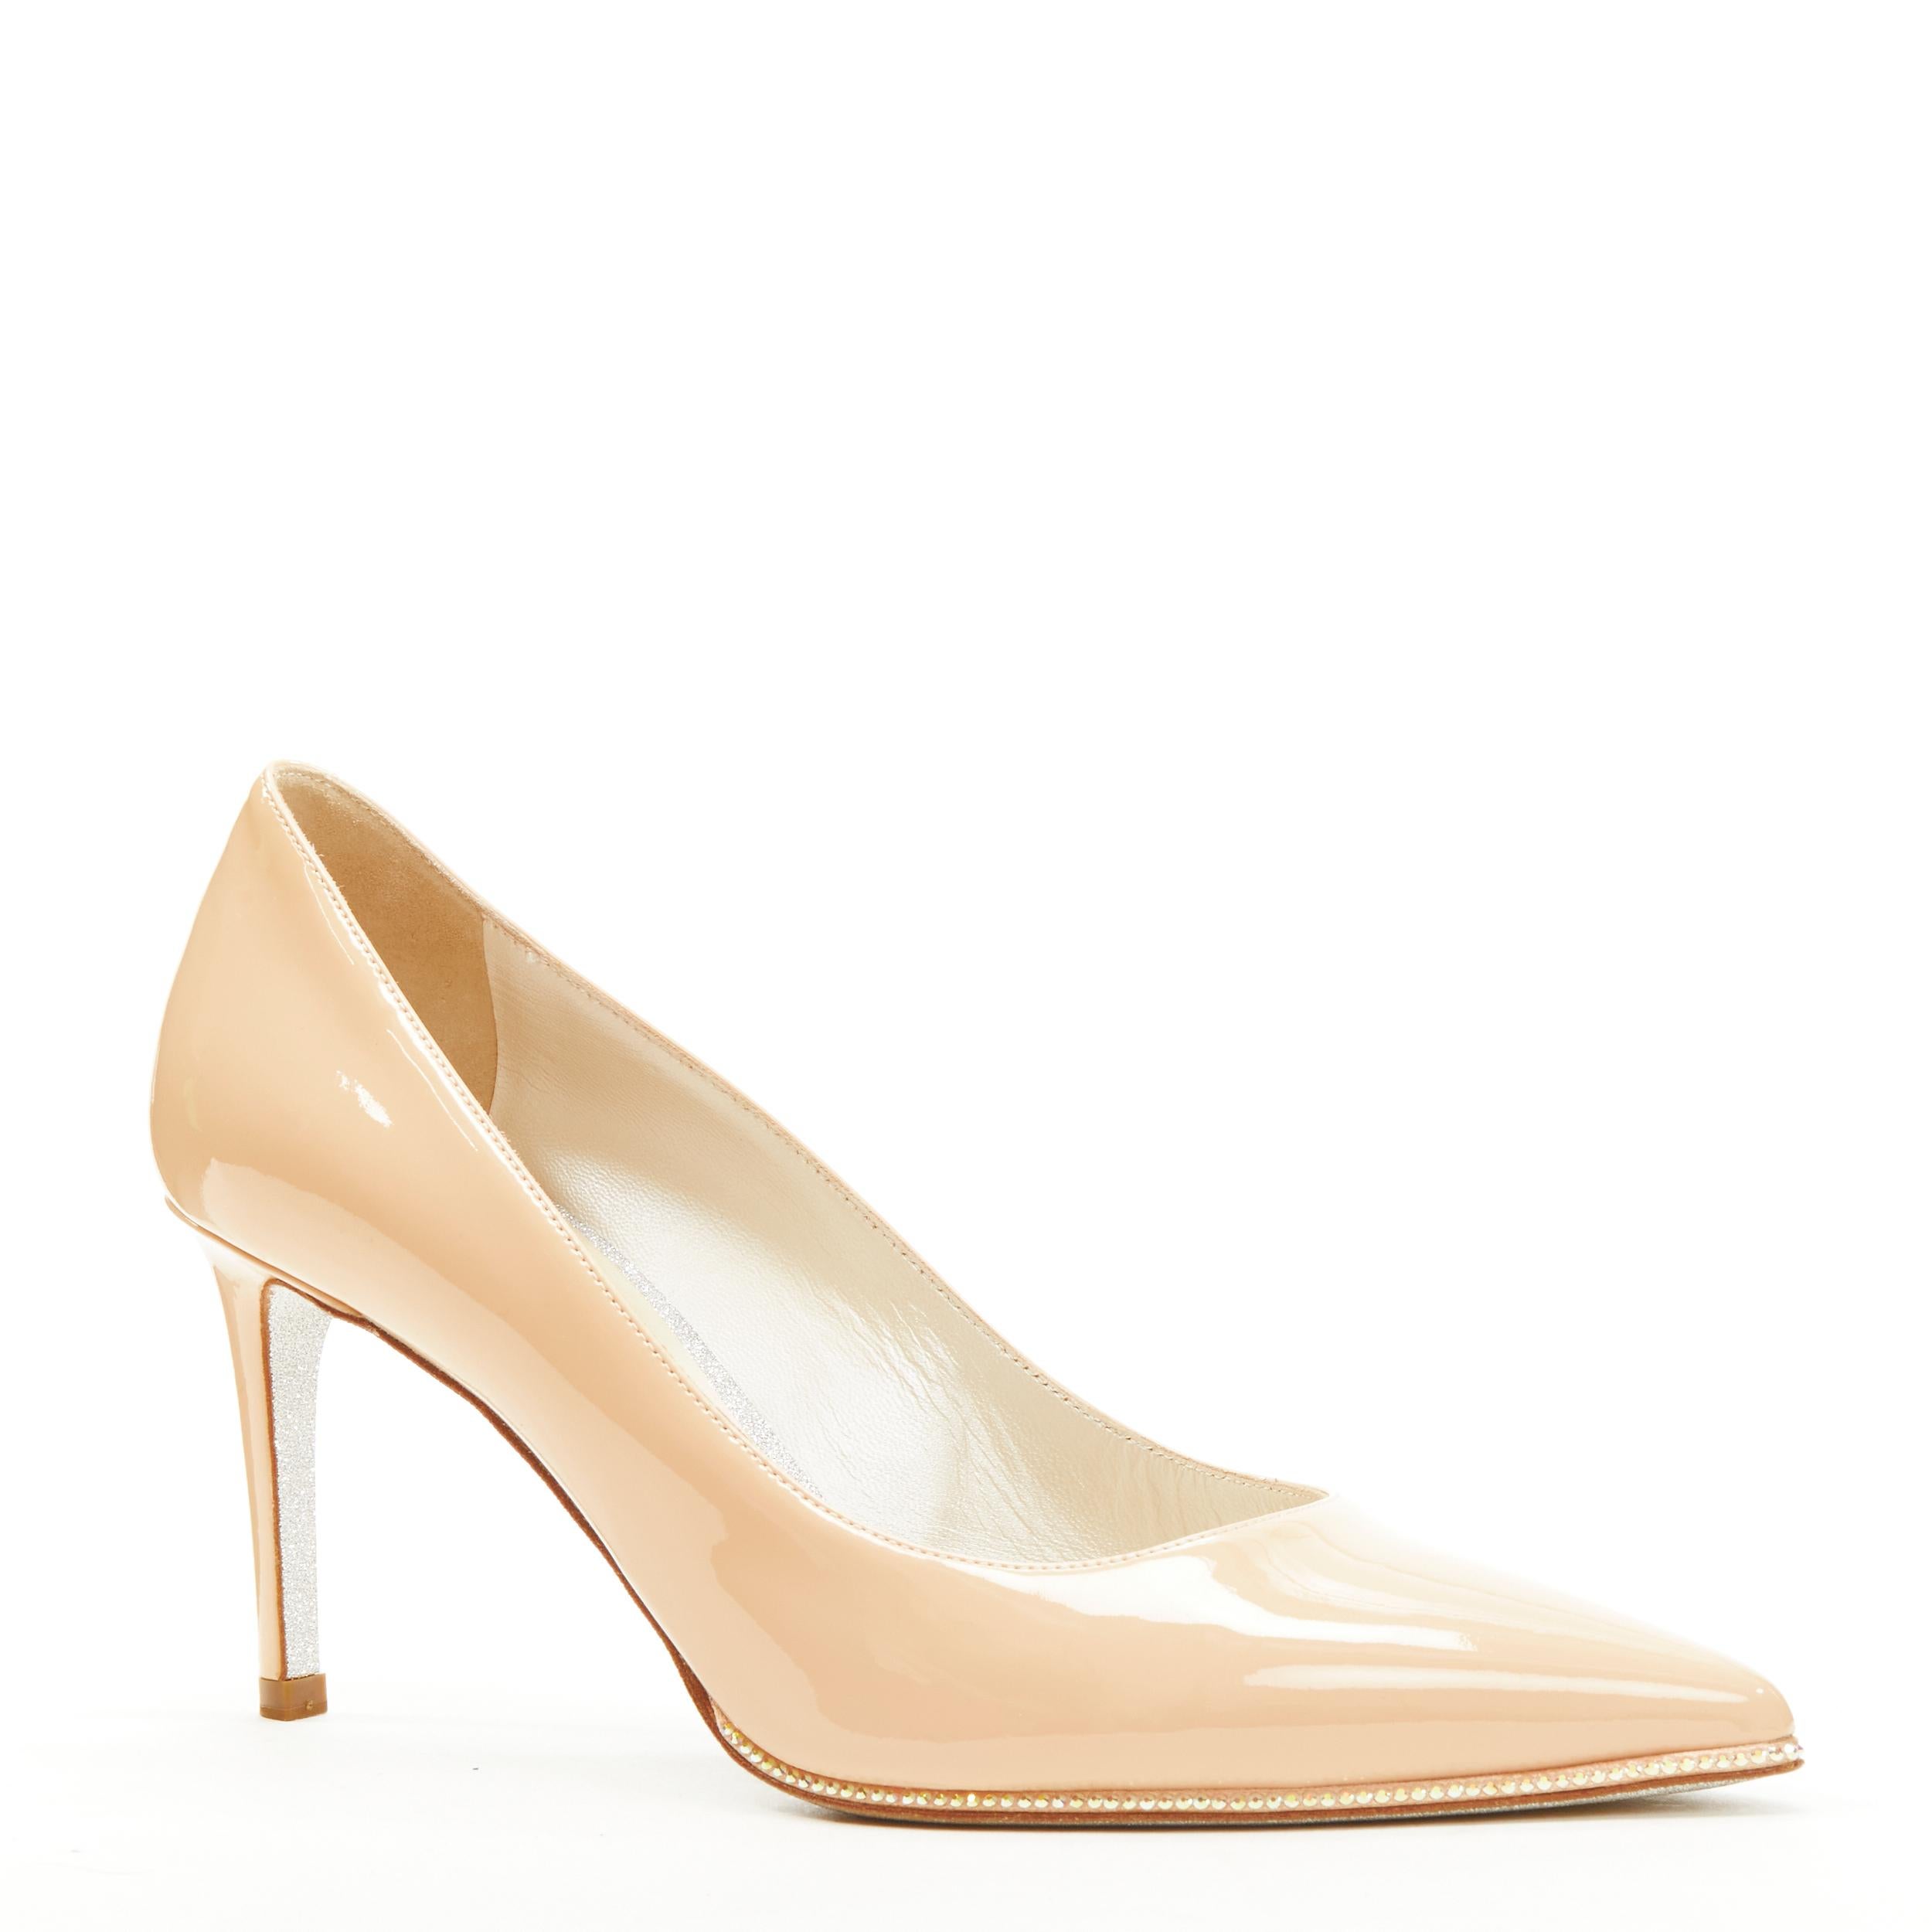 RENE CAOVILLA nude beige patent leather strass toe box pigalle pump EU37.5
Brand: Rene Caovilla
Material: Patent Leather
Color: Beige
Pattern: Solid
Extra Detail: Crystal embellishment along outsole at toe box. Silver glitter sole.
Made in: